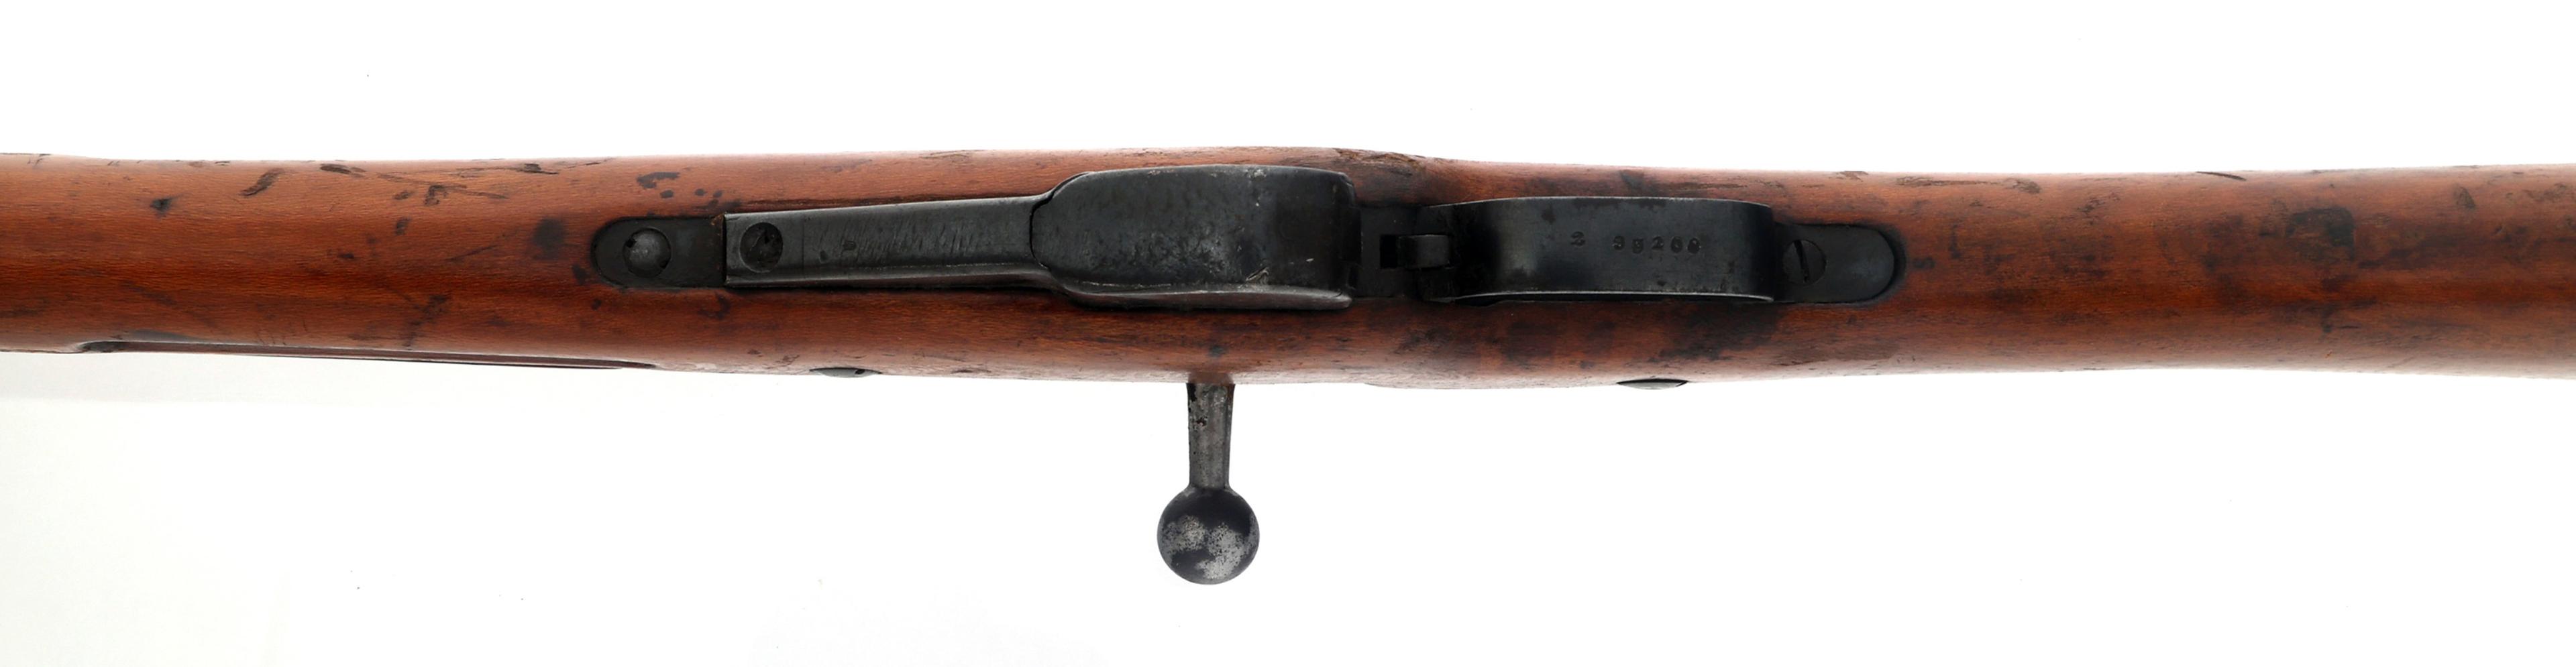 FRENCH ST ETIENNE MODEL M16 7.5x54mm CAL RIFLE